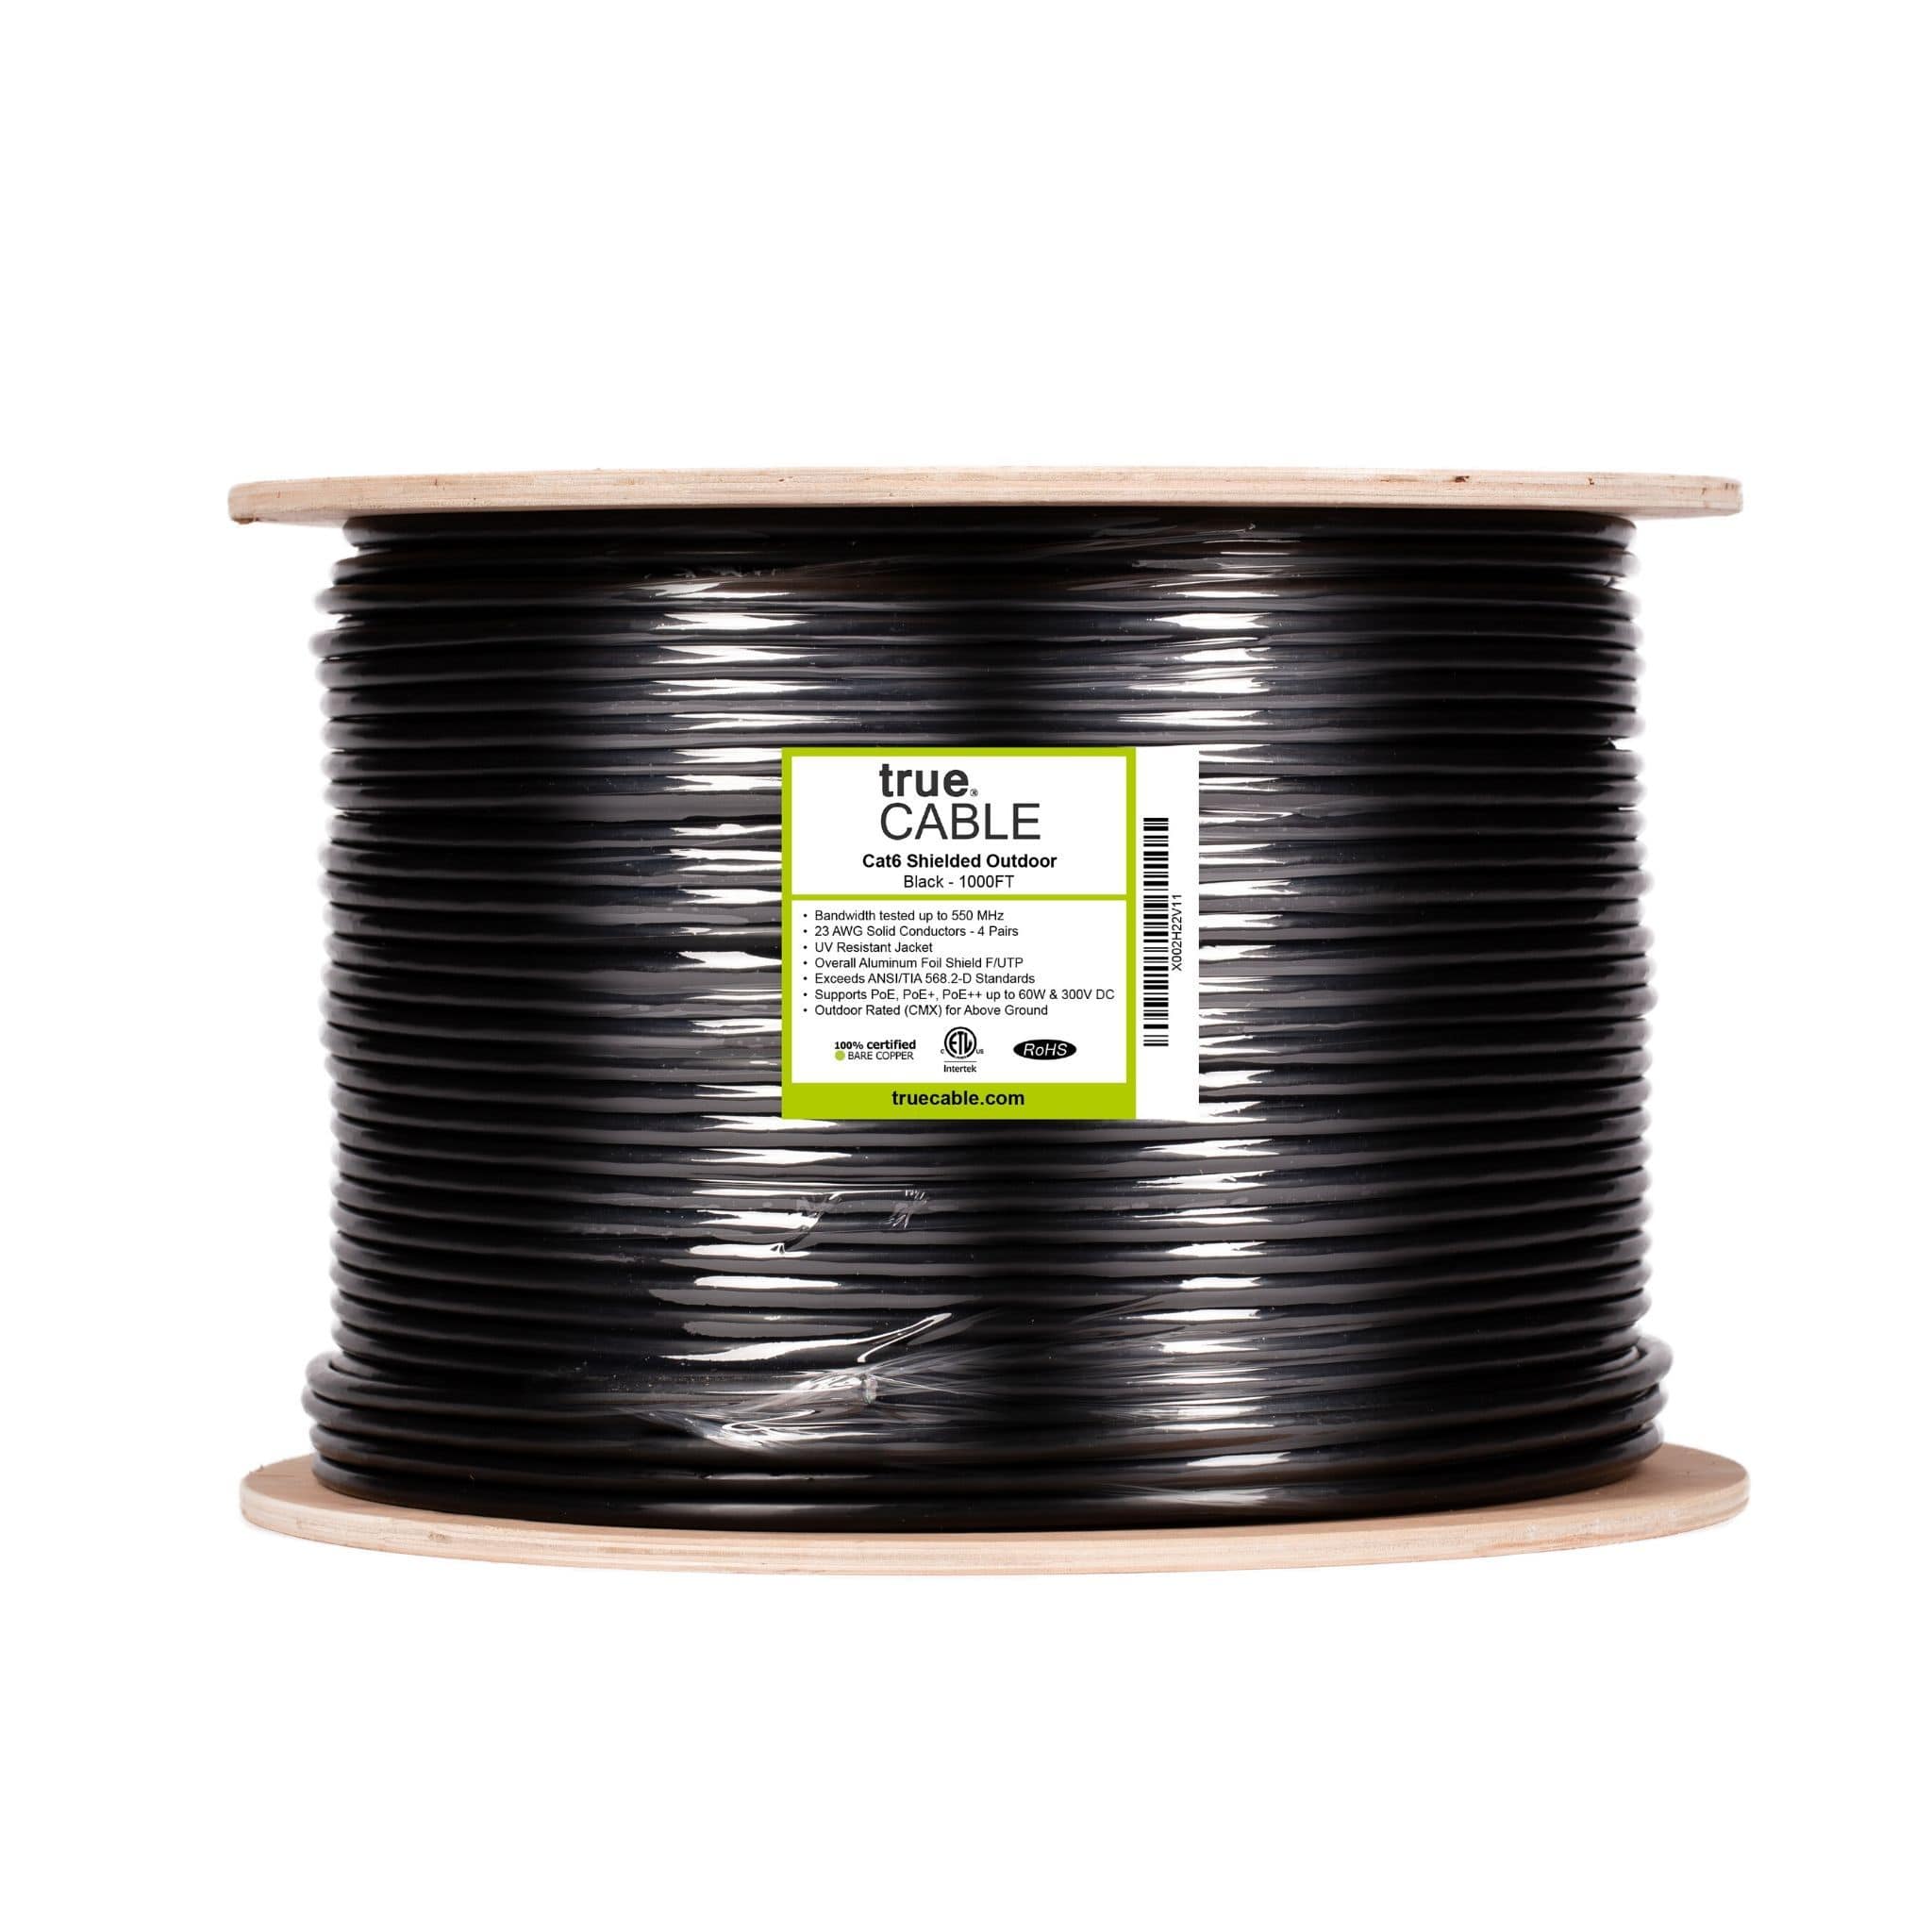 trueCABLE Cat6 Outdoor, Shielded FTP, 1000ft, UV Resistant, Aerial CMX Rated, Black, 23AWG Solid Bare Copper, 550Mhz, PoE 4PPoE, ETL Listed, Bulk